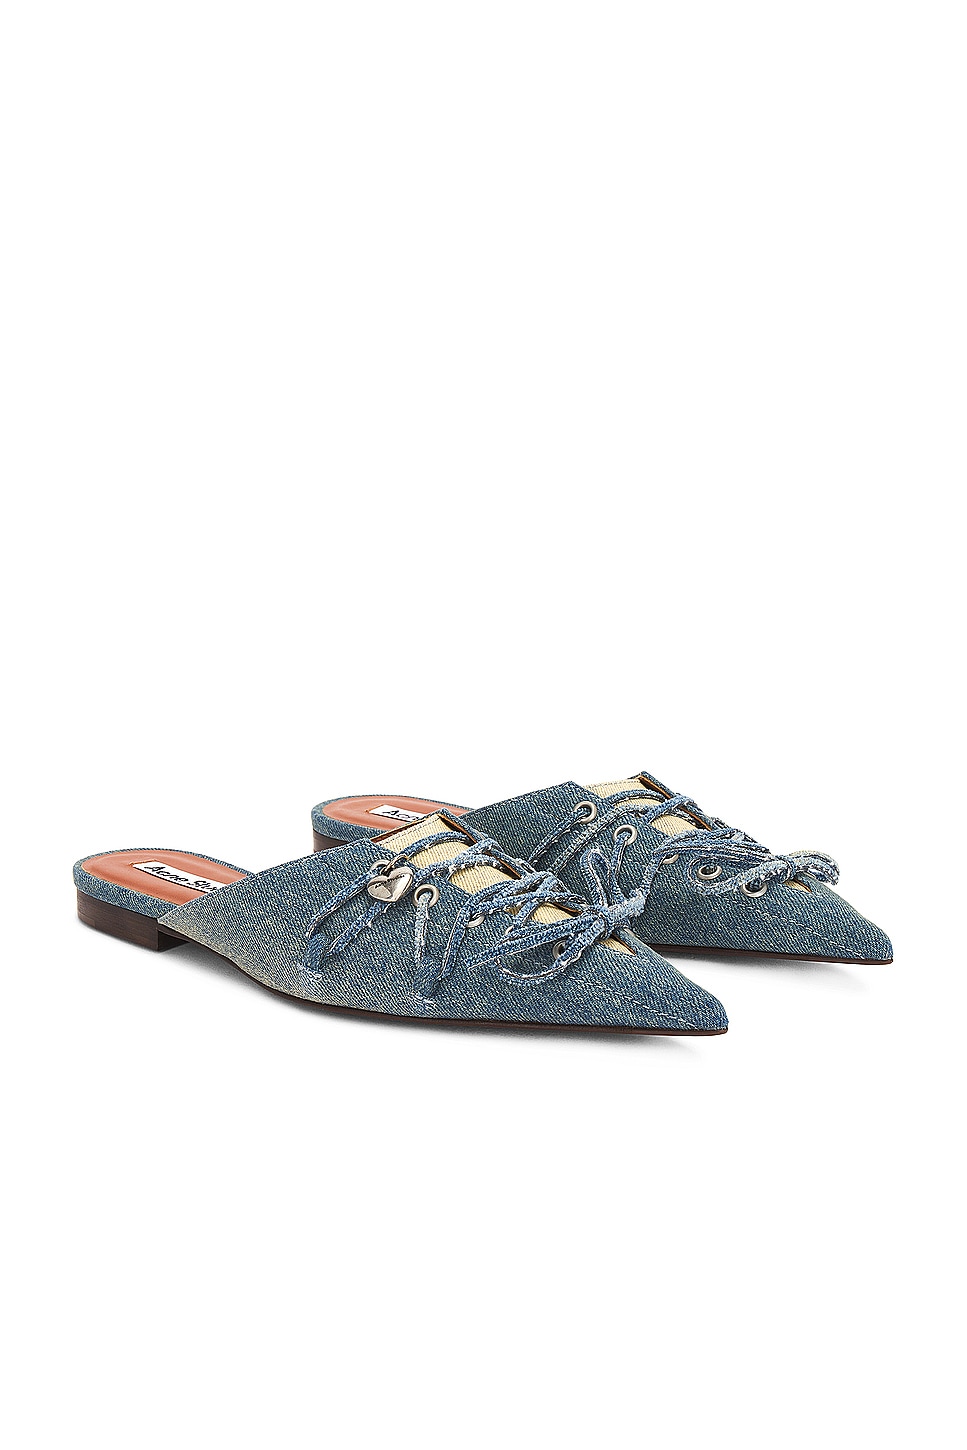 Image 1 of Acne Studios Pointed Slide in Dusty Blue